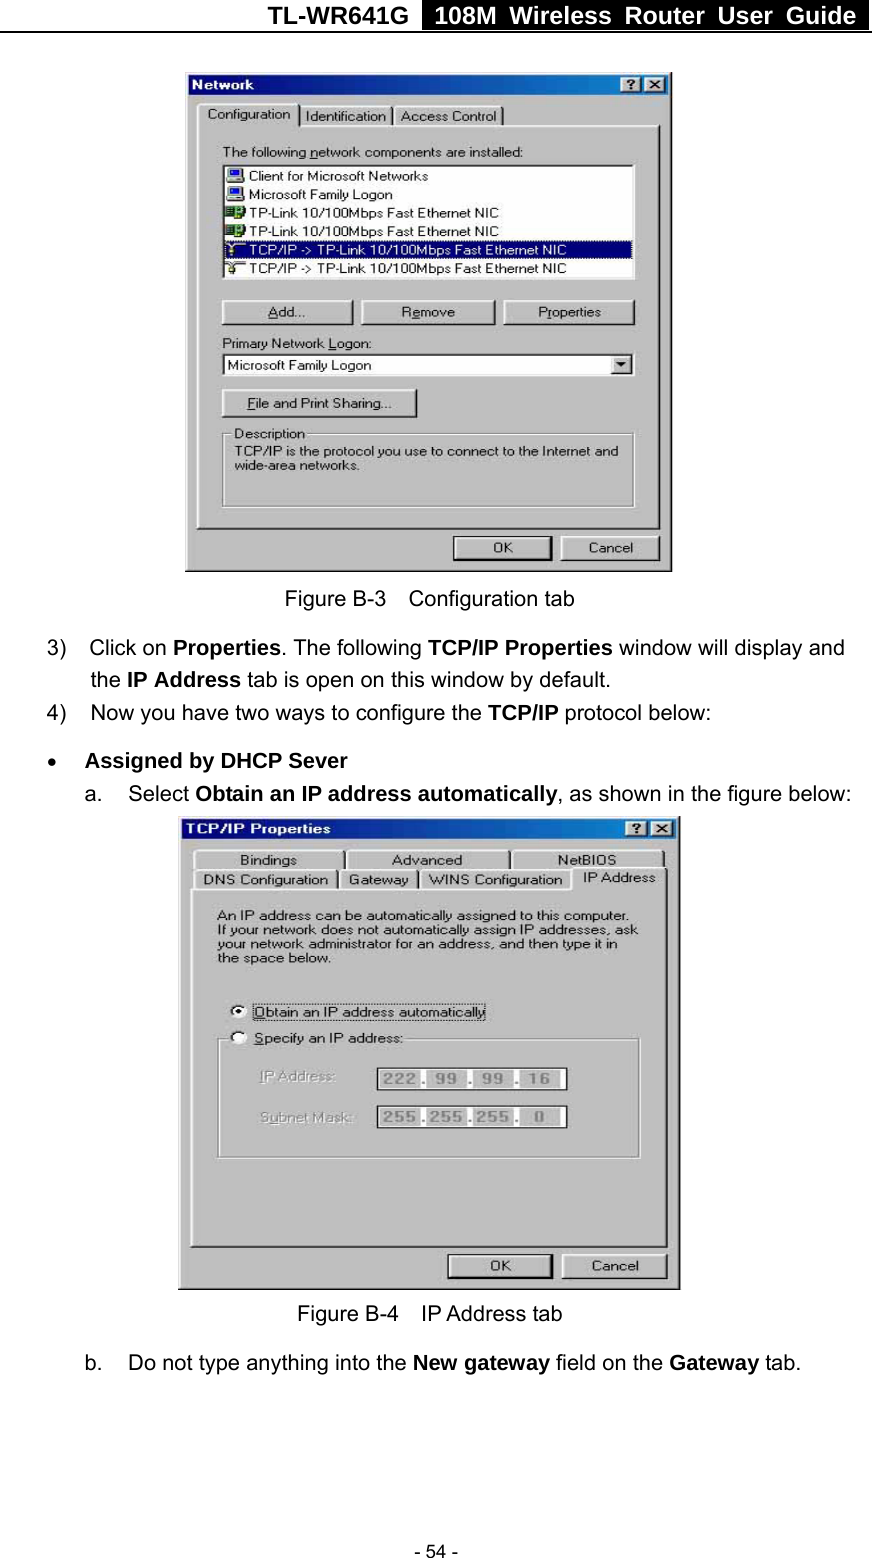 TL-WR641G   108M Wireless Router User Guide   - 54 - Figure B-3  Configuration tab 3)  Click on Properties. The following TCP/IP Properties window will display and   the IP Address tab is open on this window by default. 4)  Now you have two ways to configure the TCP/IP protocol below: • Assigned by DHCP Sever a. Select Obtain an IP address automatically, as shown in the figure below:  Figure B-4  IP Address tab b.  Do not type anything into the New gateway field on the Gateway tab.   